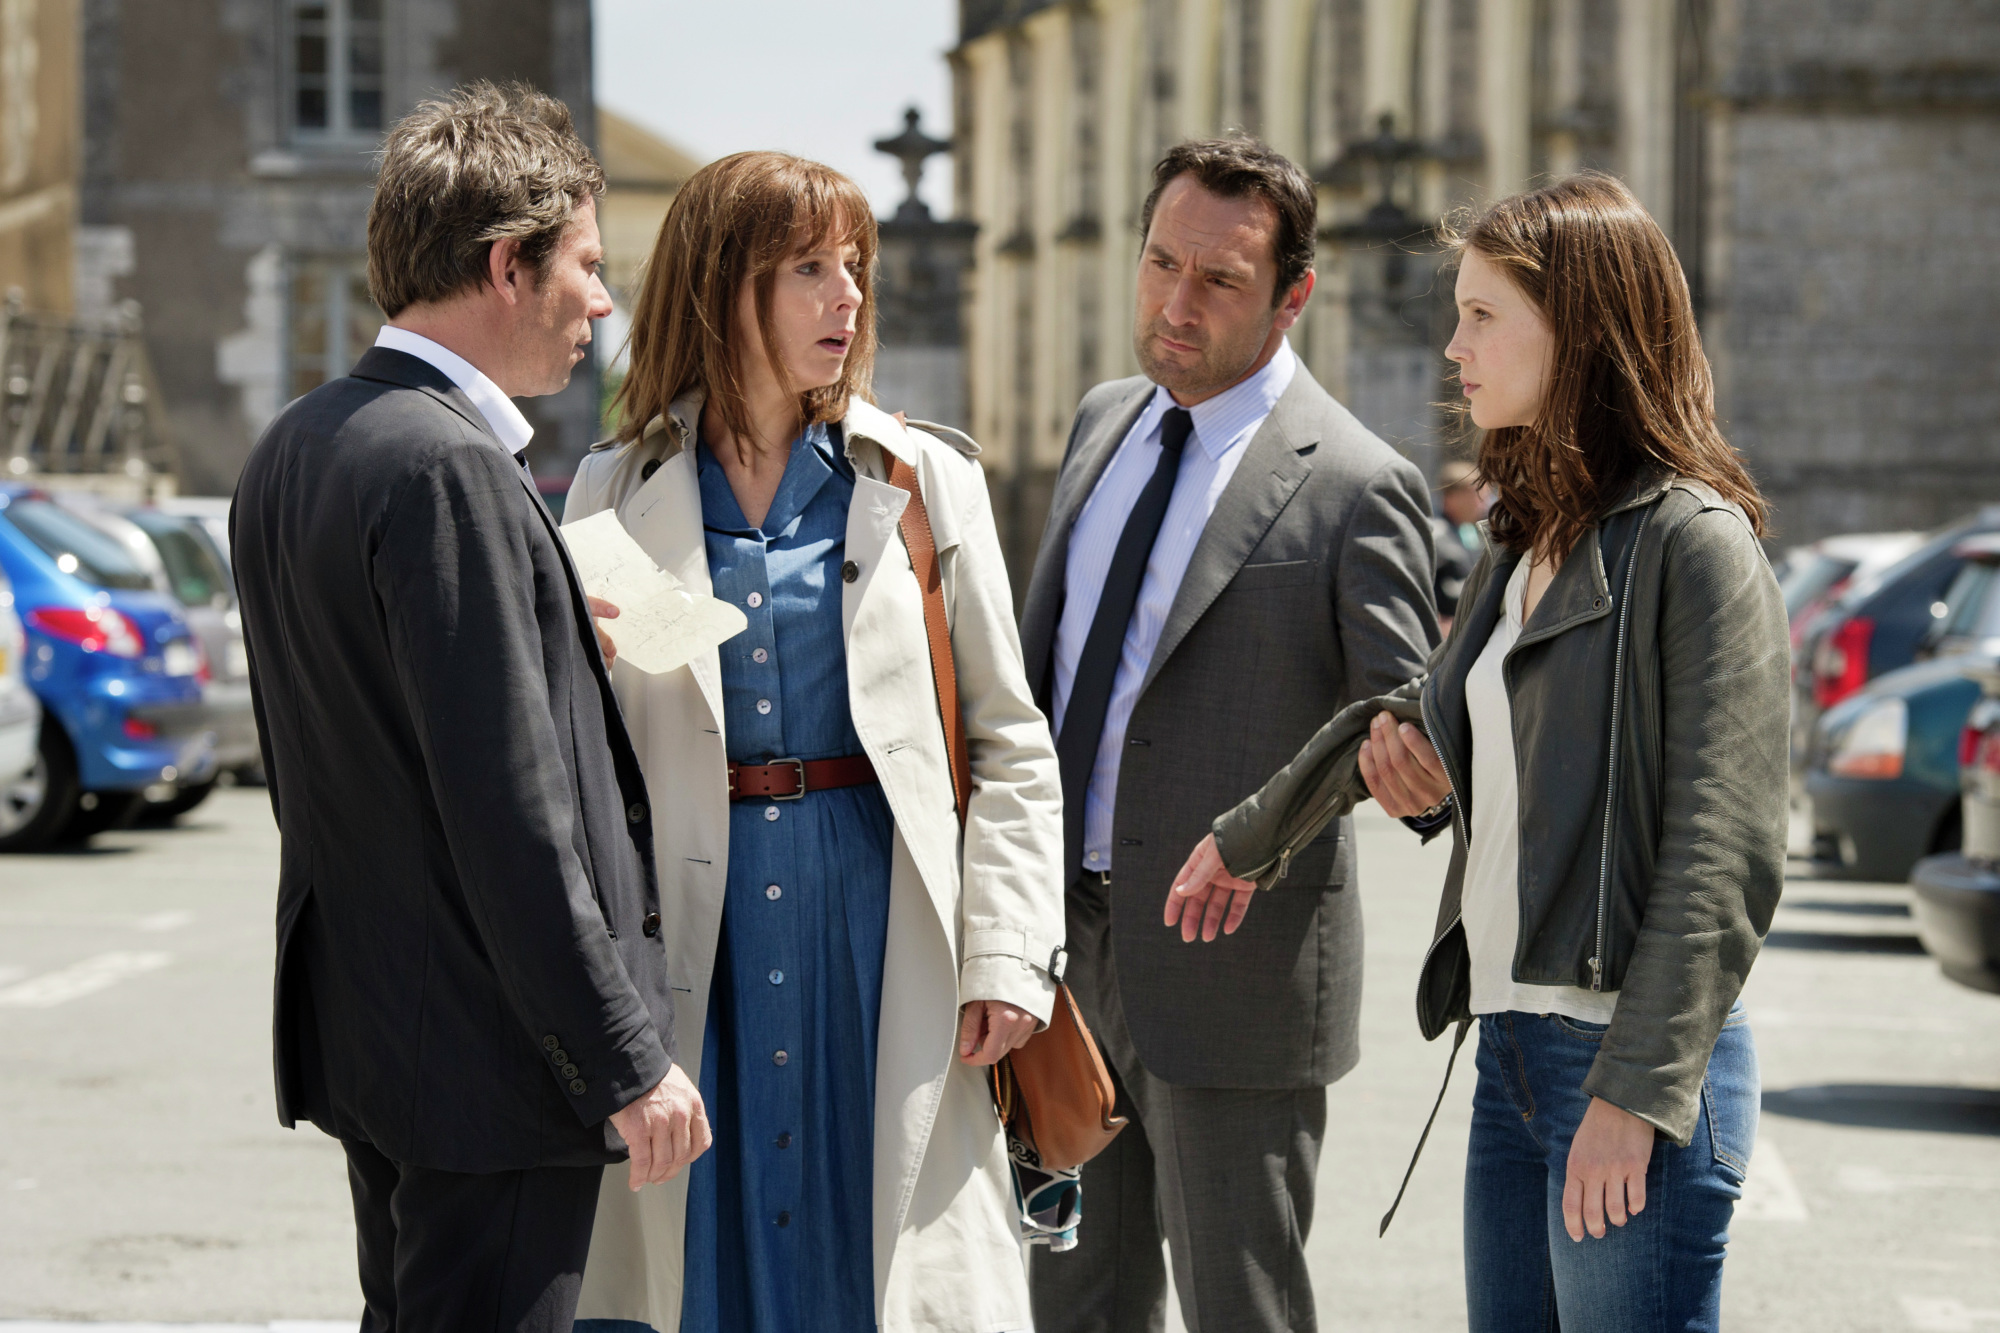 Still of Mathieu Amalric, Gilles Lellouche, Karin Viard and Marine Vacth in Belles familles (2015)